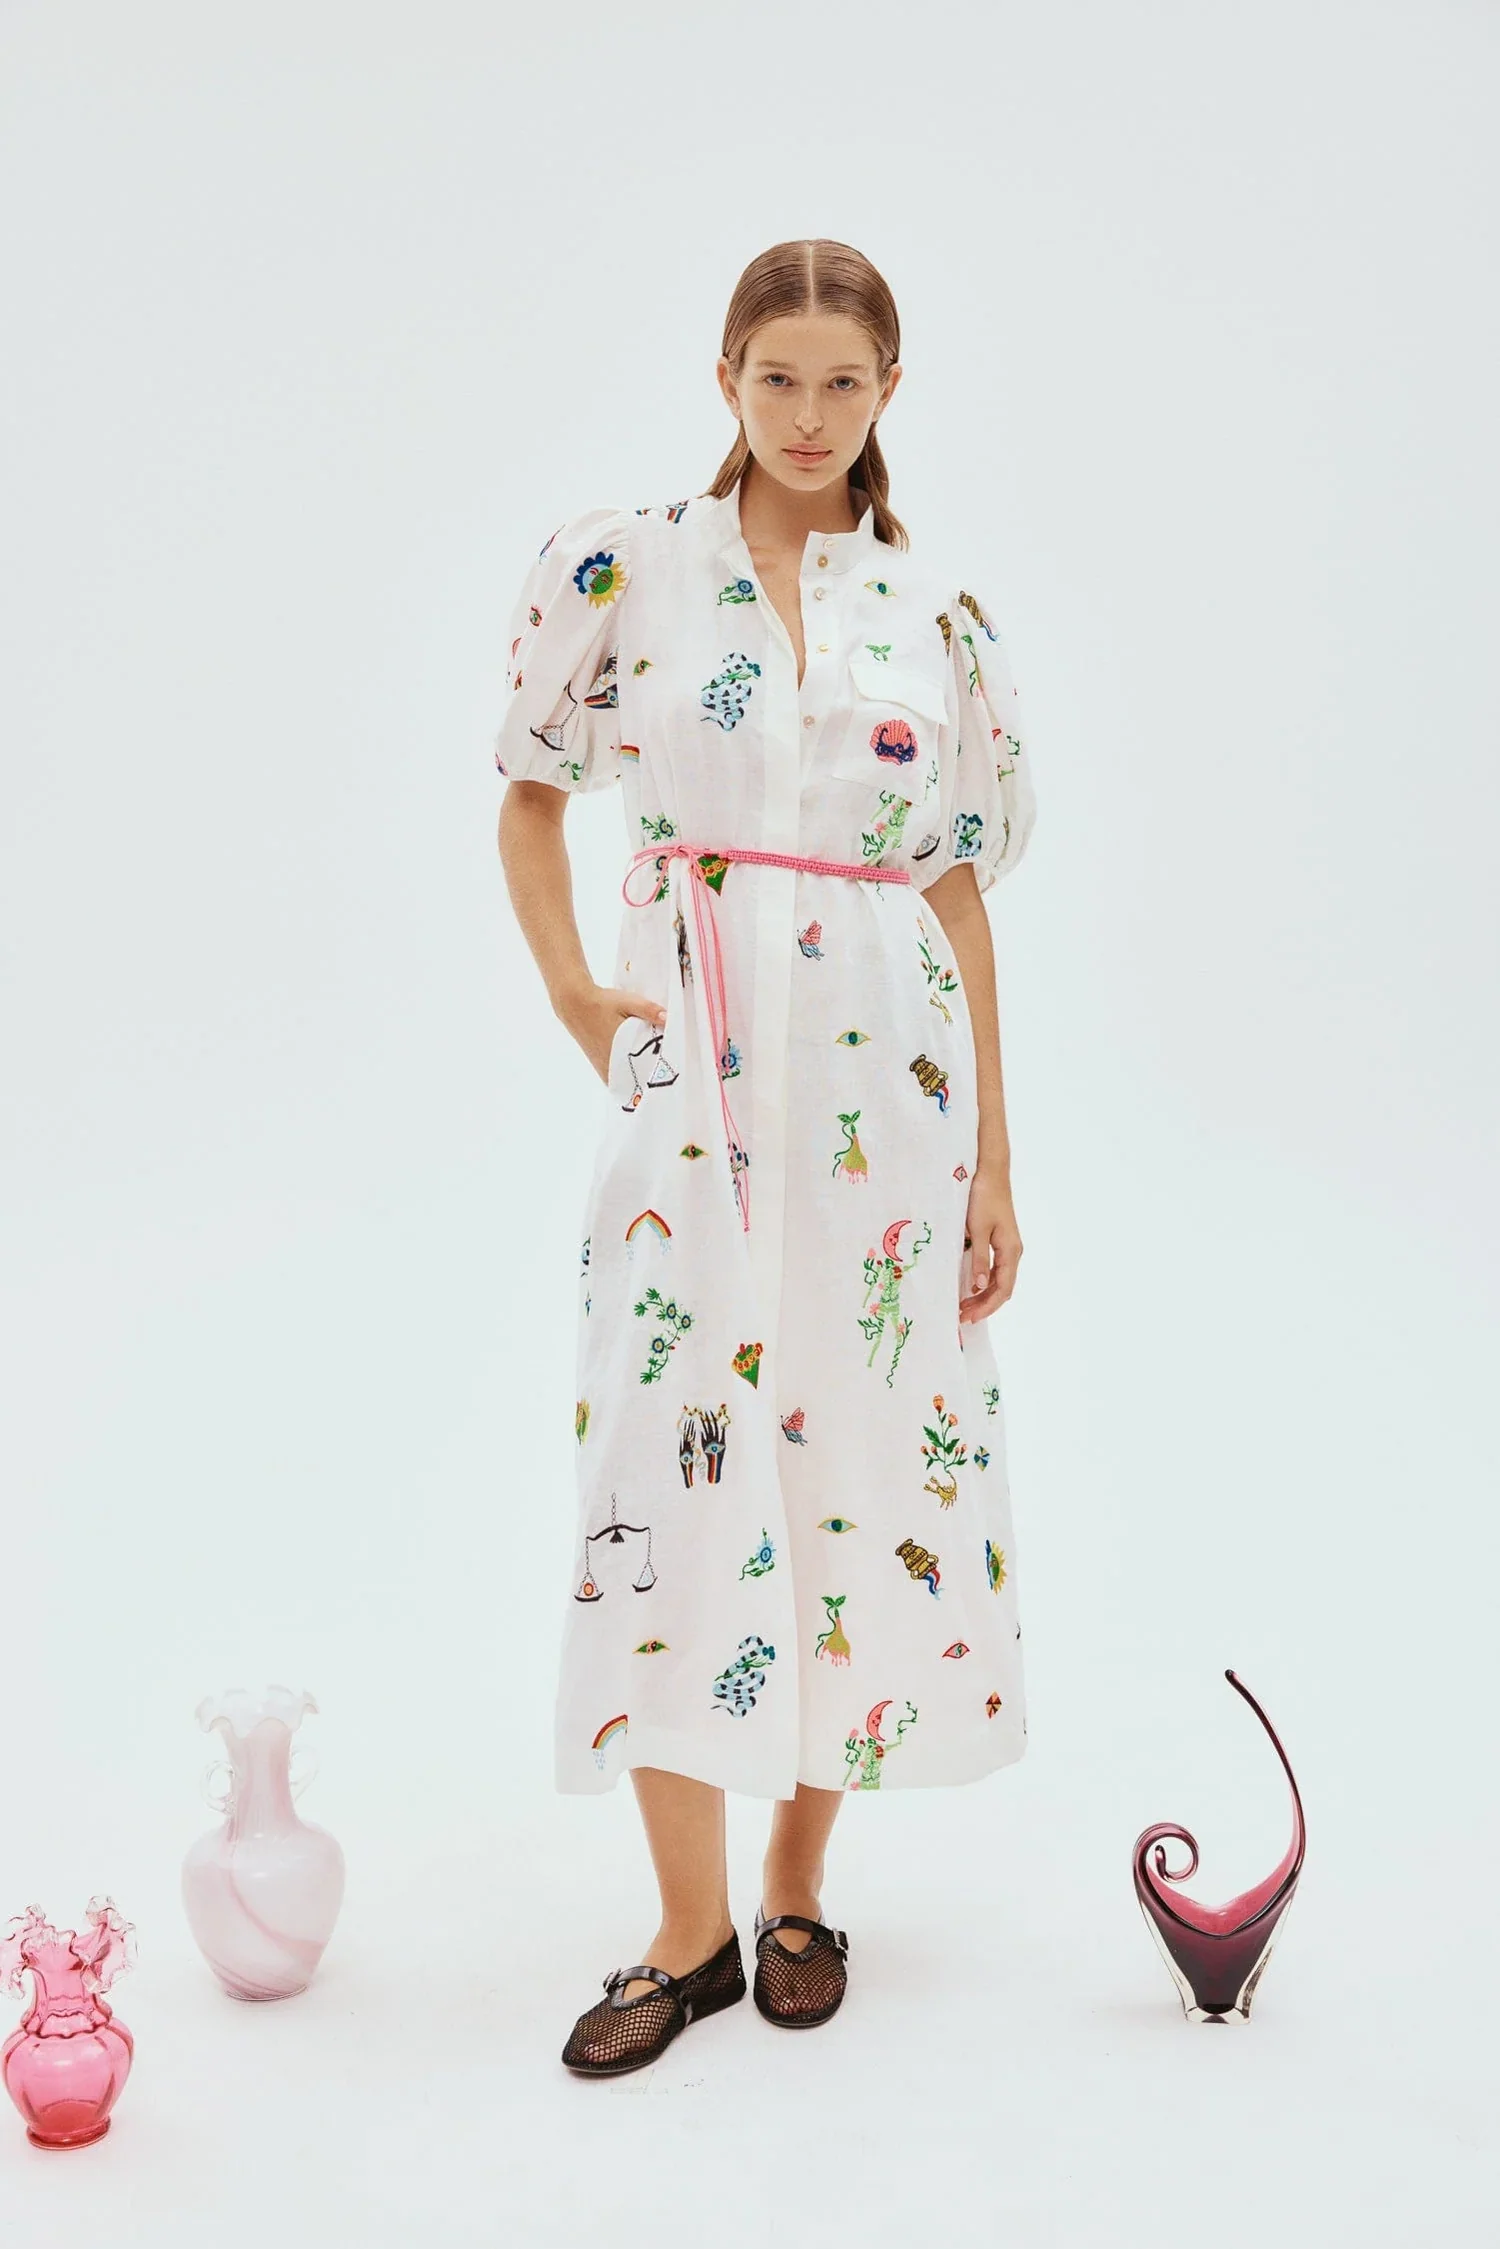 Alémais Embroidered Shirtdress in Cream available at The New Trend.